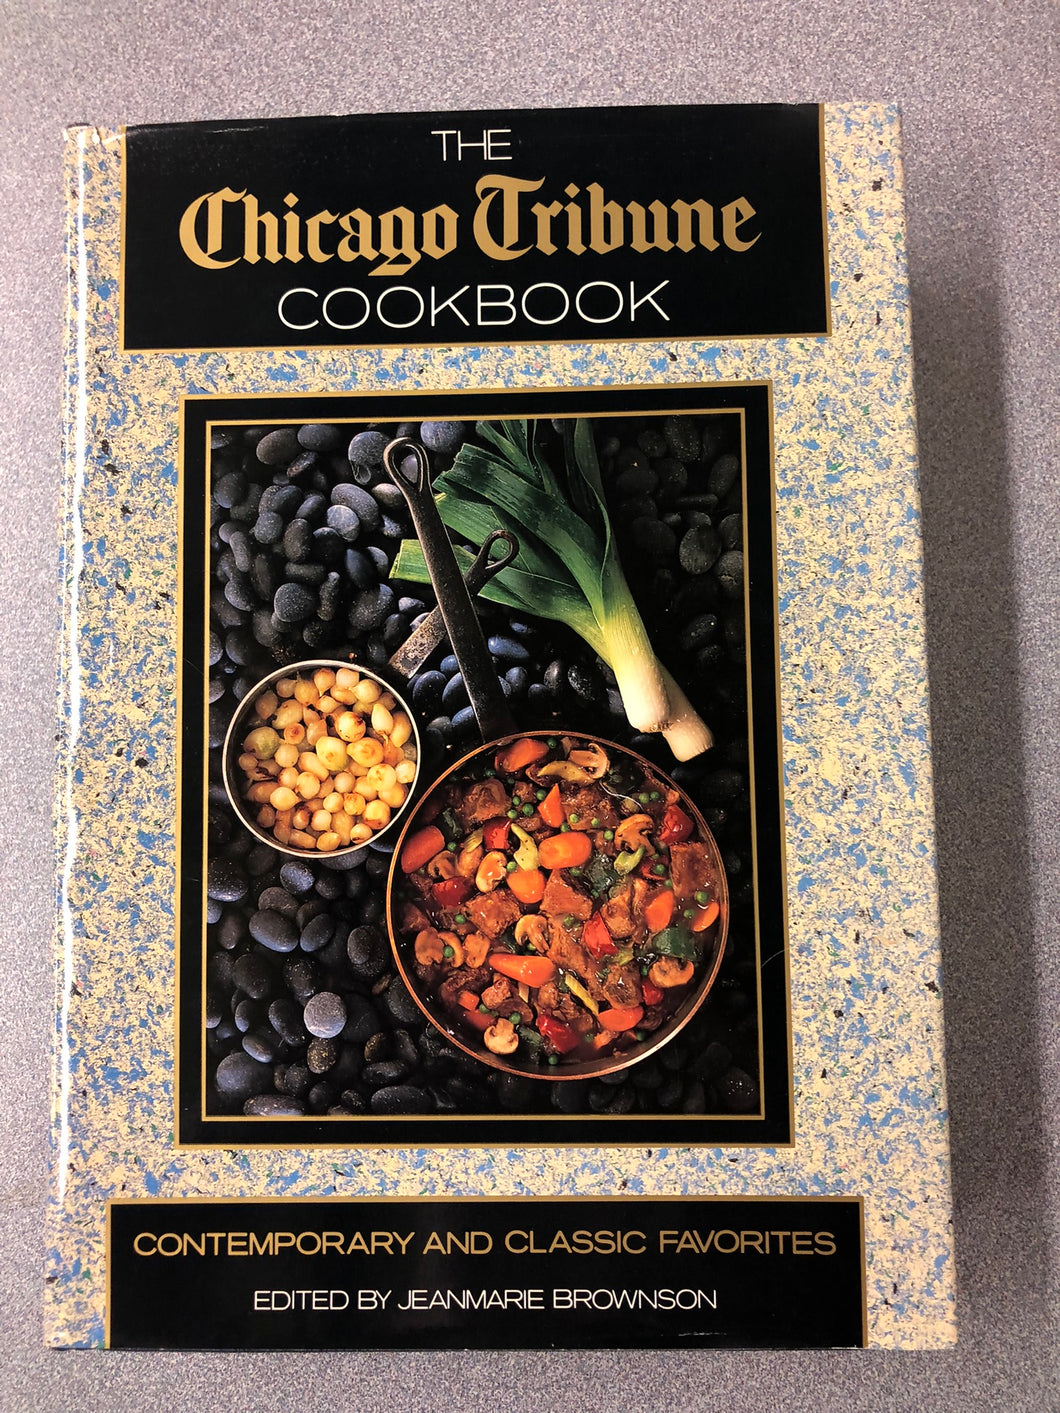 The Chicago Tribune Cookbook: Contemporary and Classic Favorites, Brownson, Jeanmarie, ed., [1989] CO 7/22